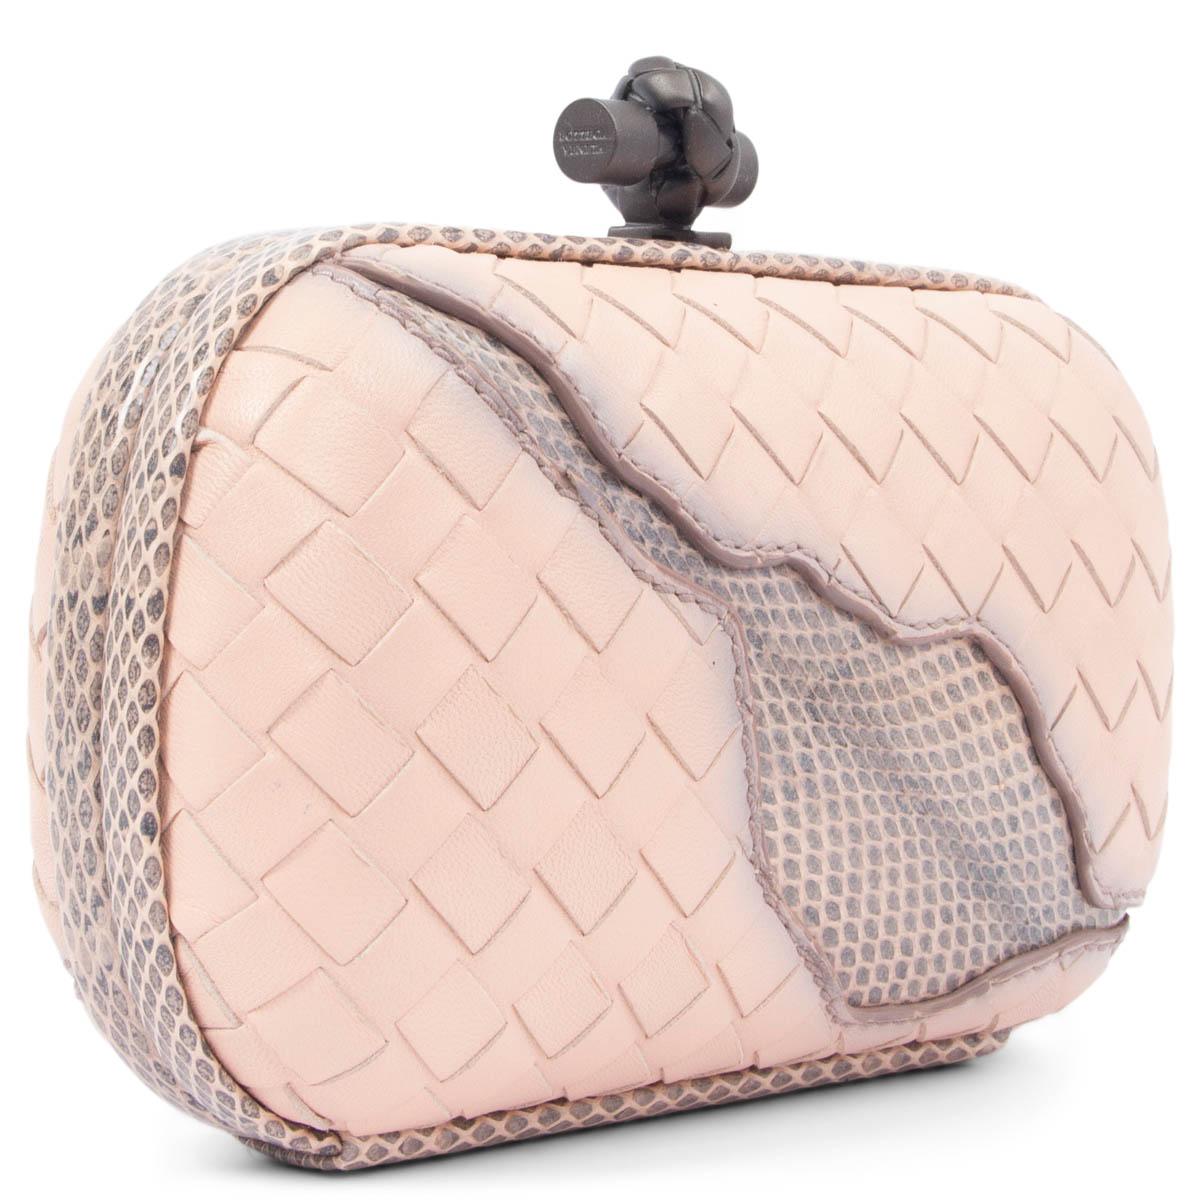 100% authentic Bottega Veneta Glimmer Knot small clutch in nude Intrecciato lambskin and lizard tim. The front looks like it has been ripped diagonally from the top right to its bottom and is lined in nude and light grey lizard. The interior is